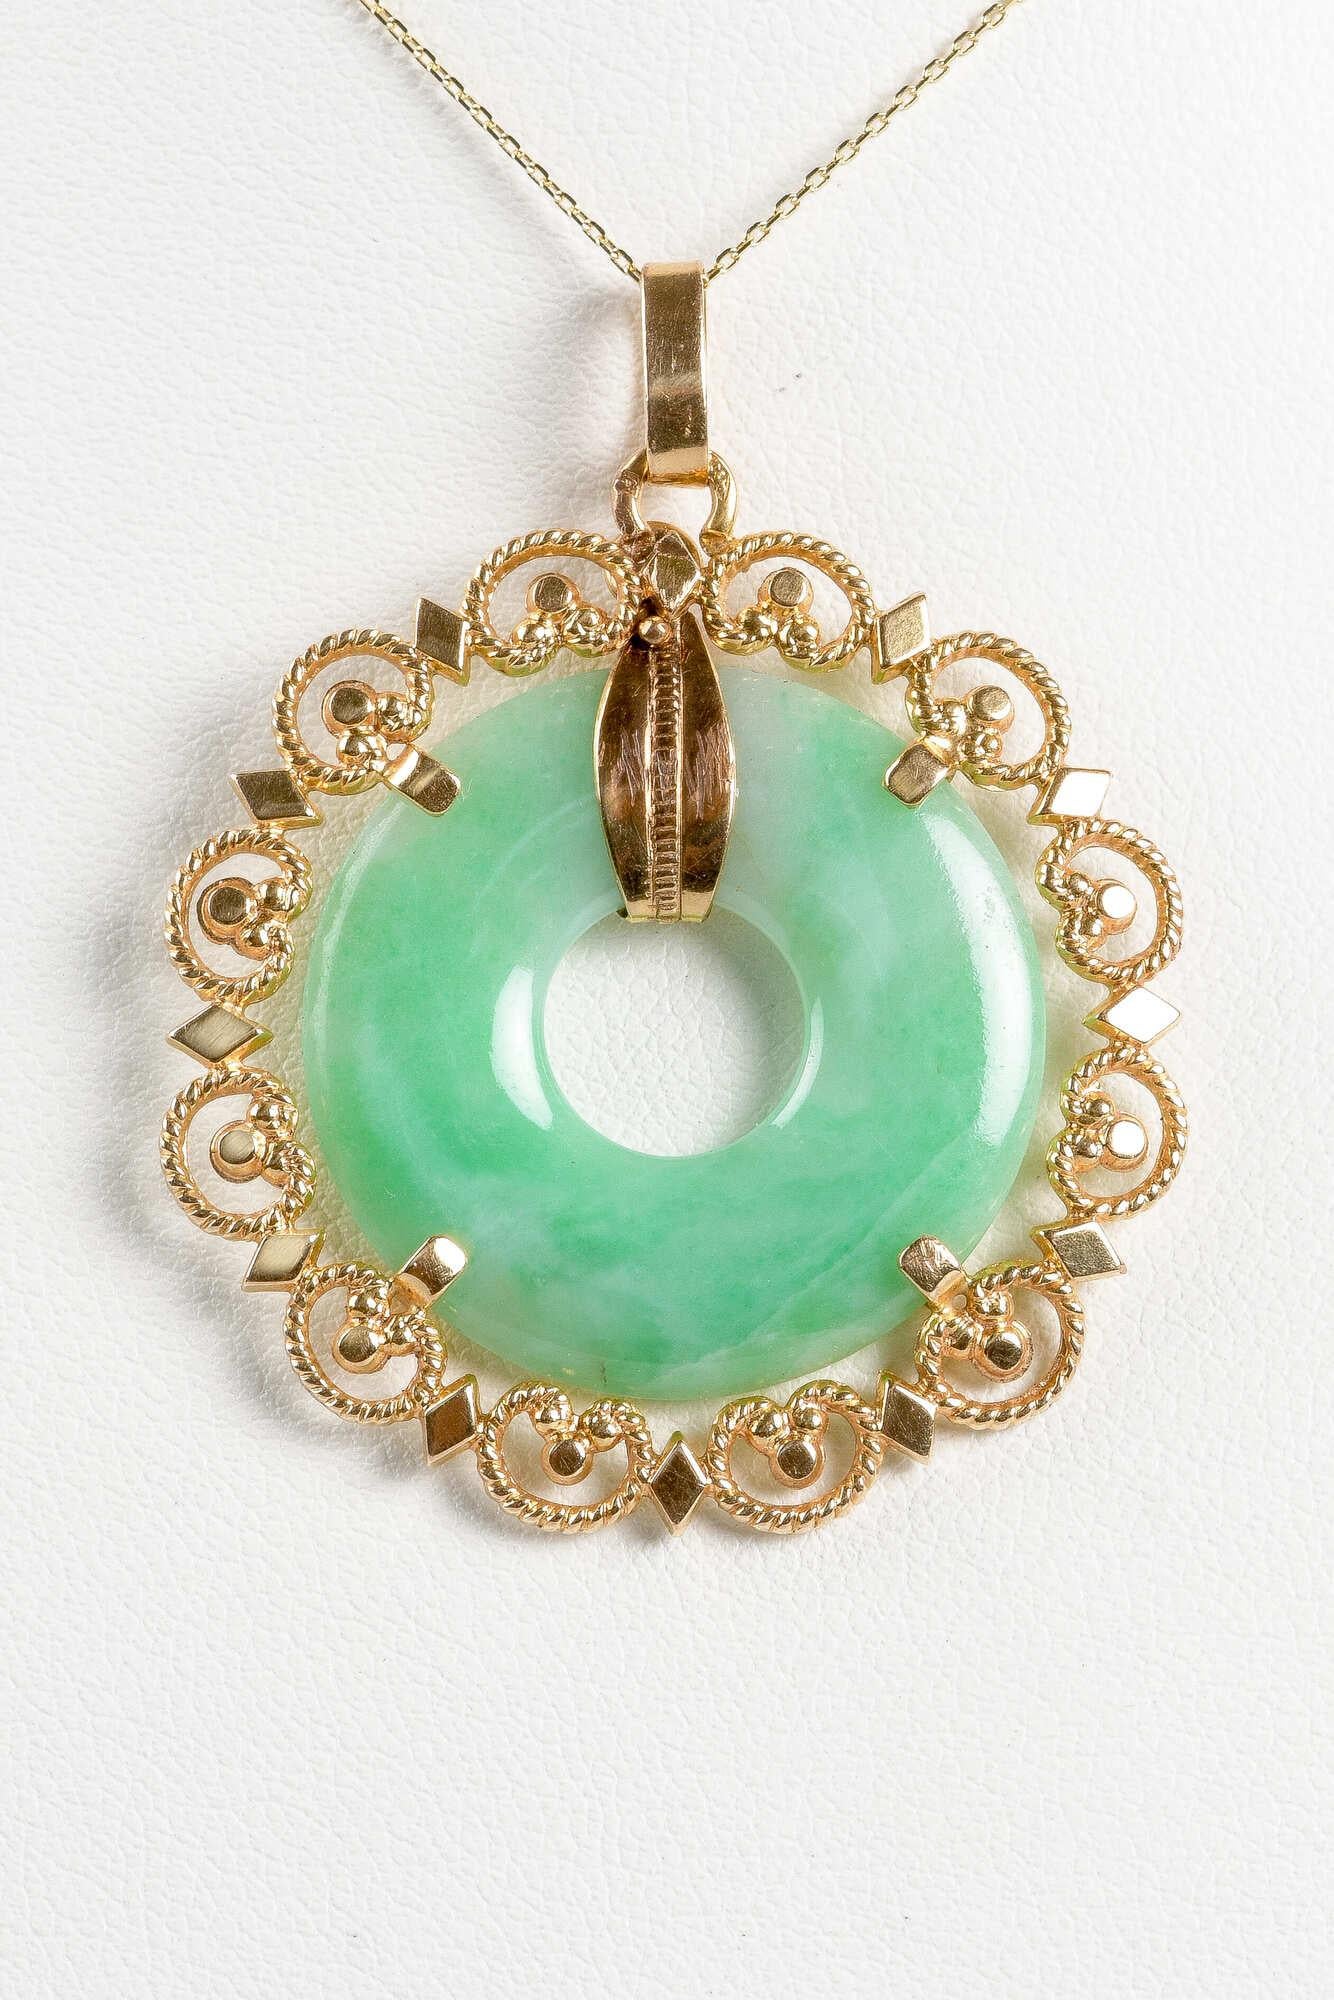 Women's Necklace in 18 carats yellow gold with a jade's pendant in the shape of donut